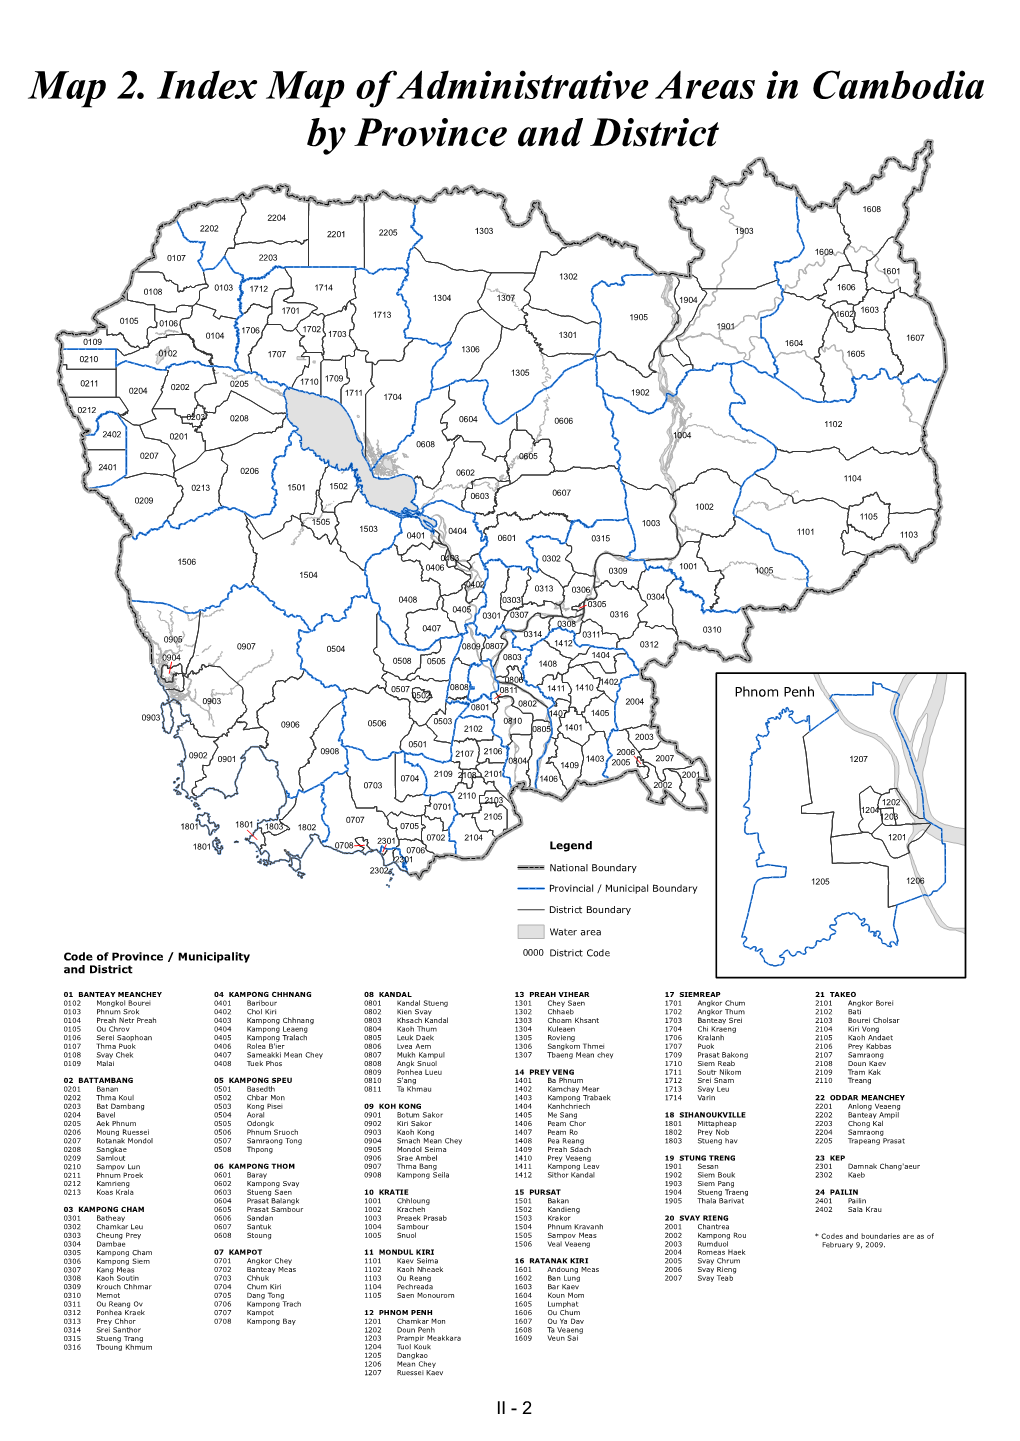 Map 2. Index Map of Administrative Areas in Cambodia by Province and District